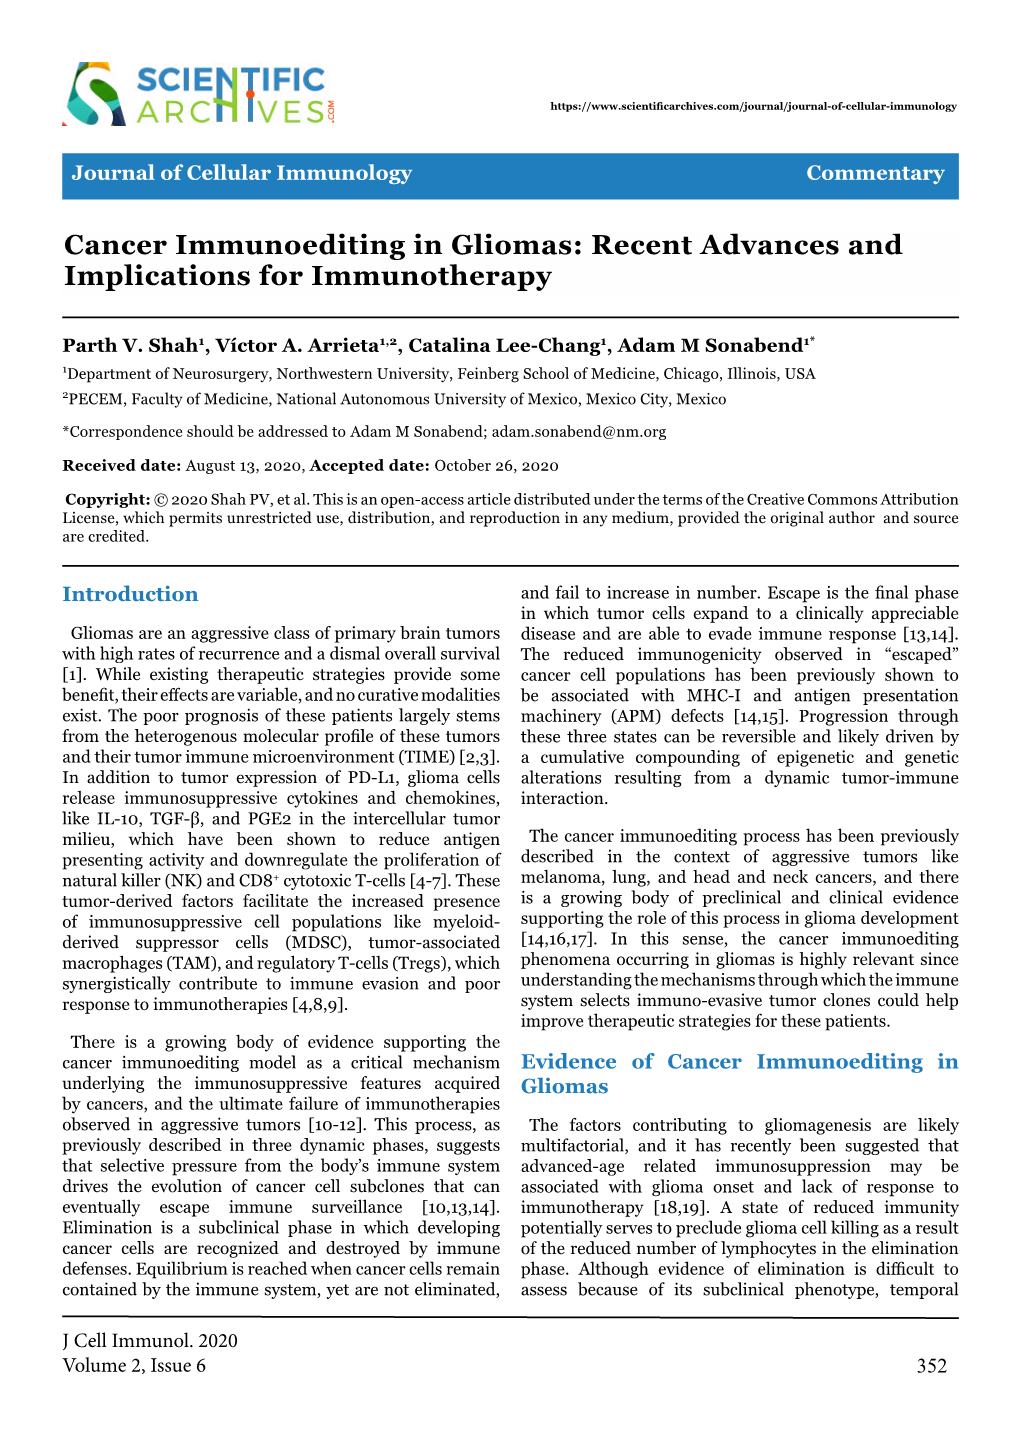 Cancer Immunoediting in Gliomas: Recent Advances and Implications for Immunotherapy